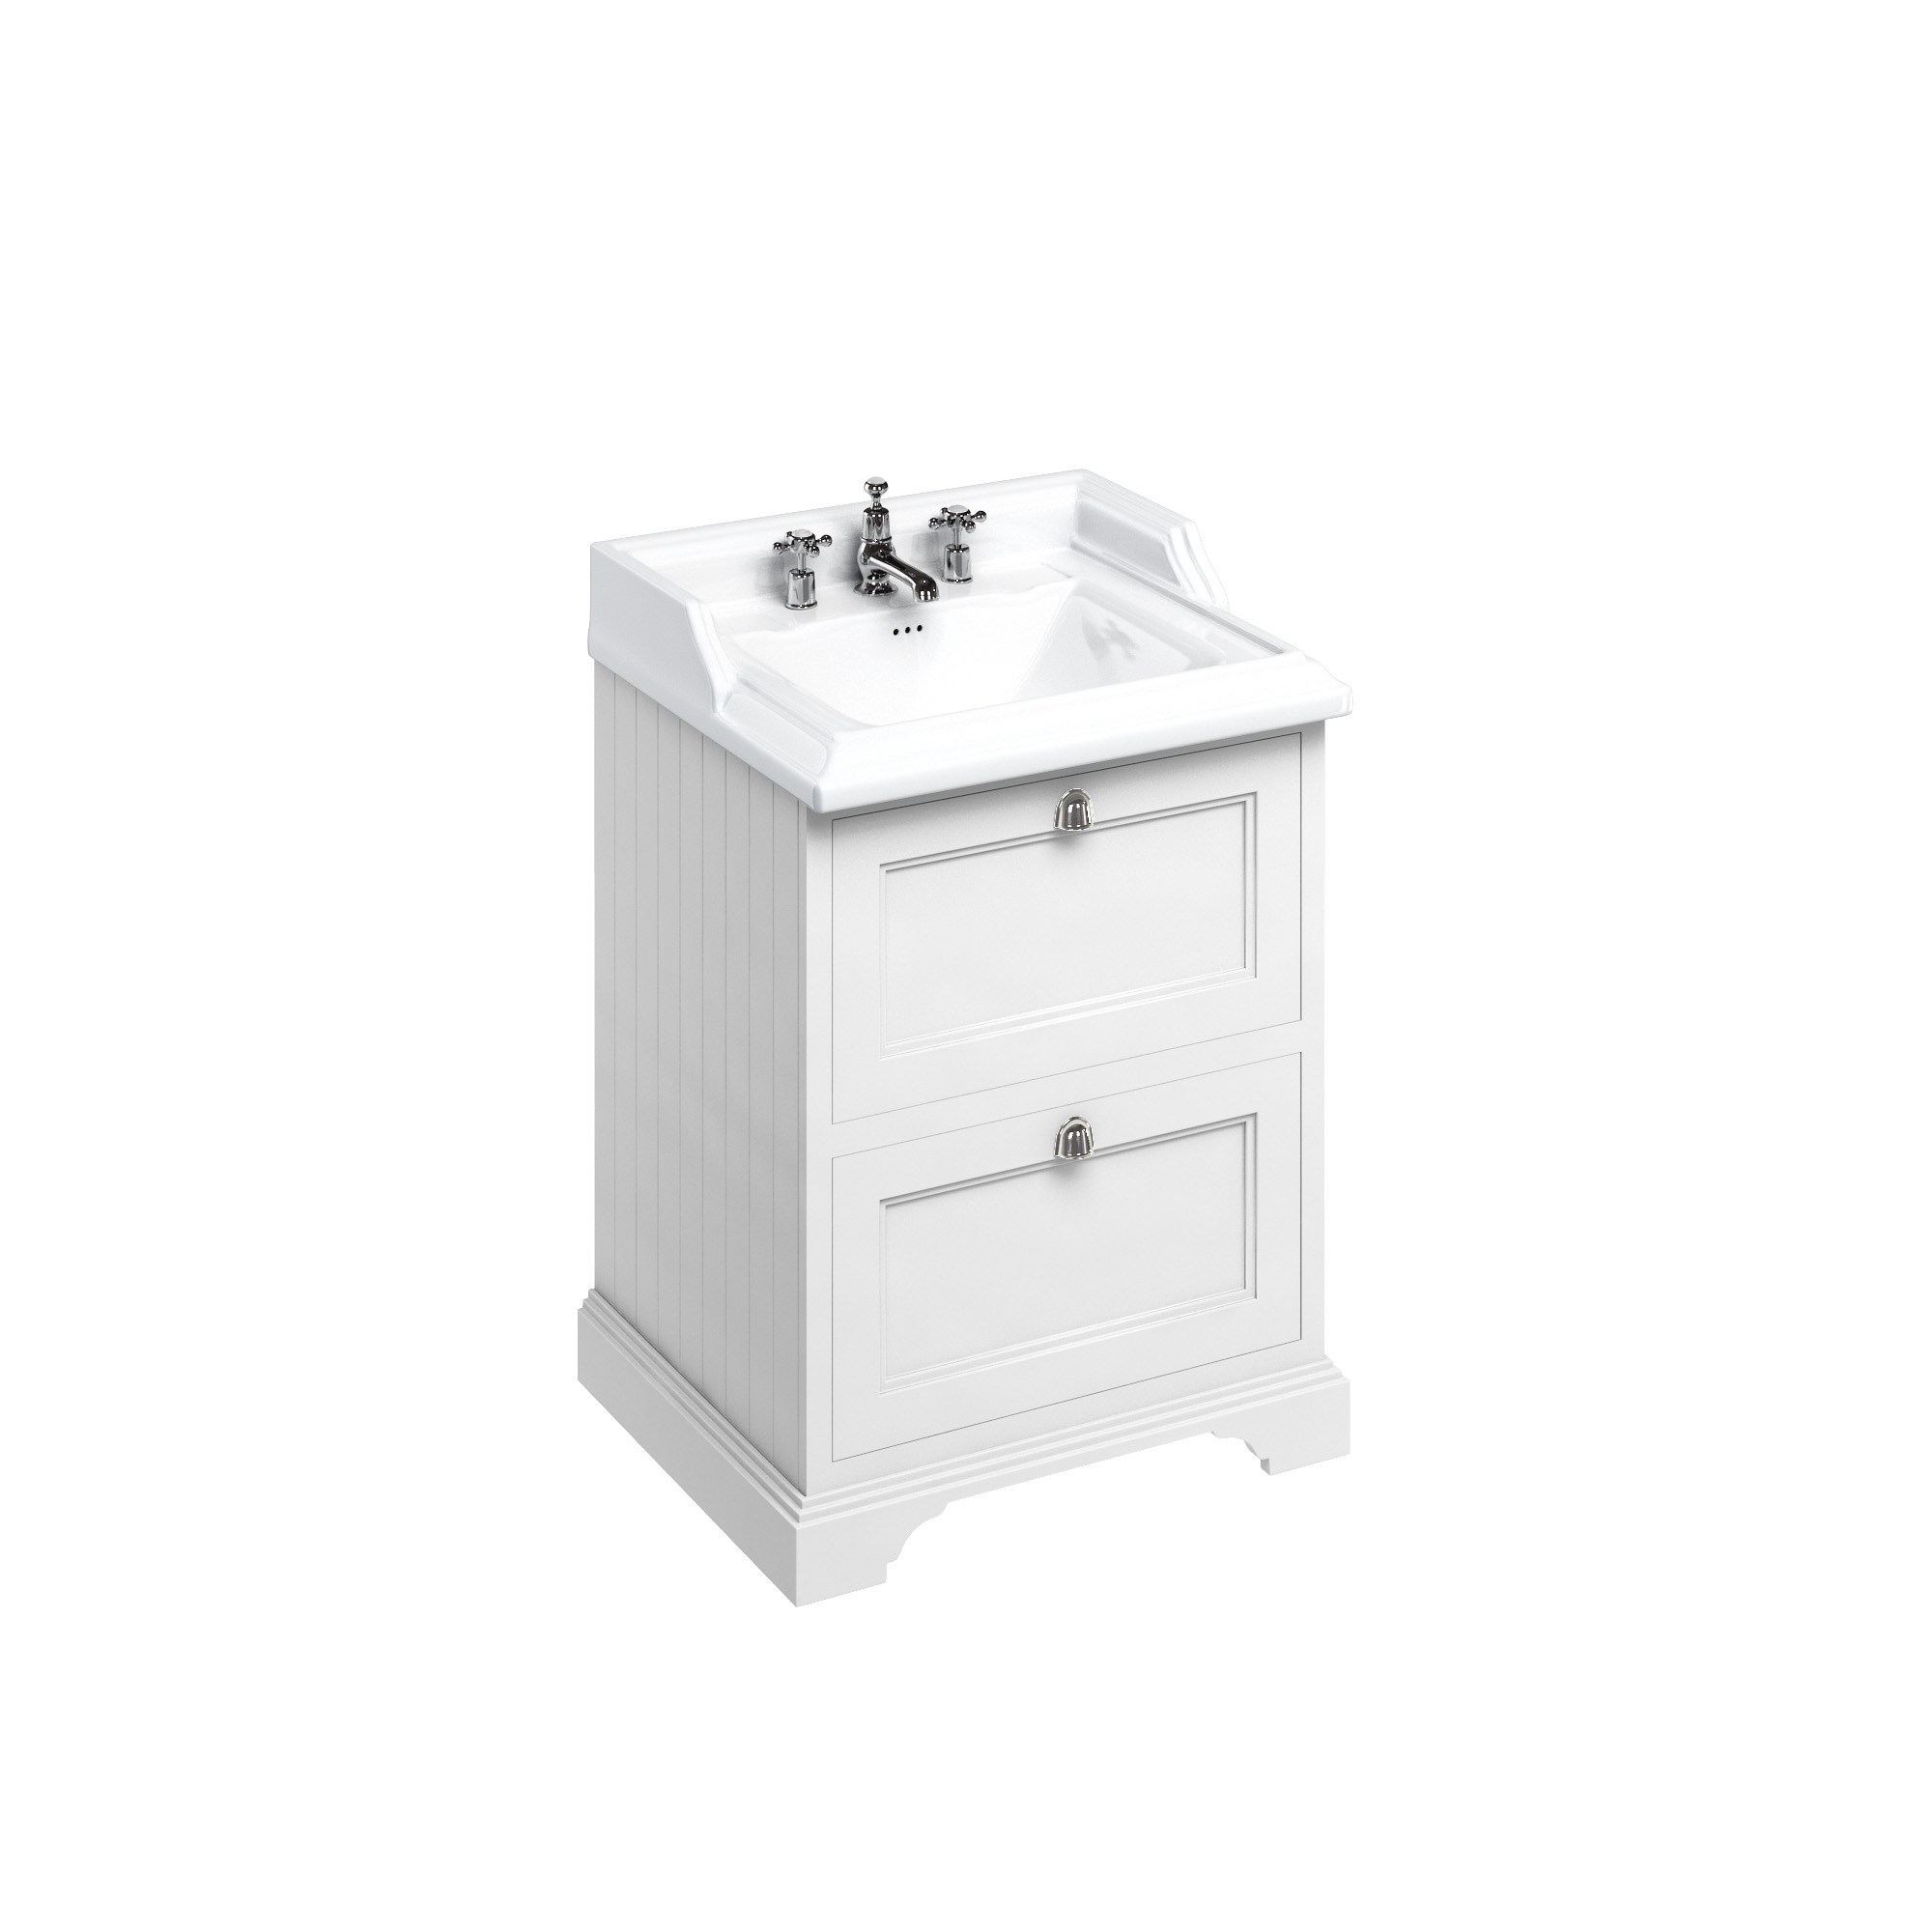 Freestanding 65 Vanity Unit with 2 drawers - Matt White and Classic basin 3 tap holes